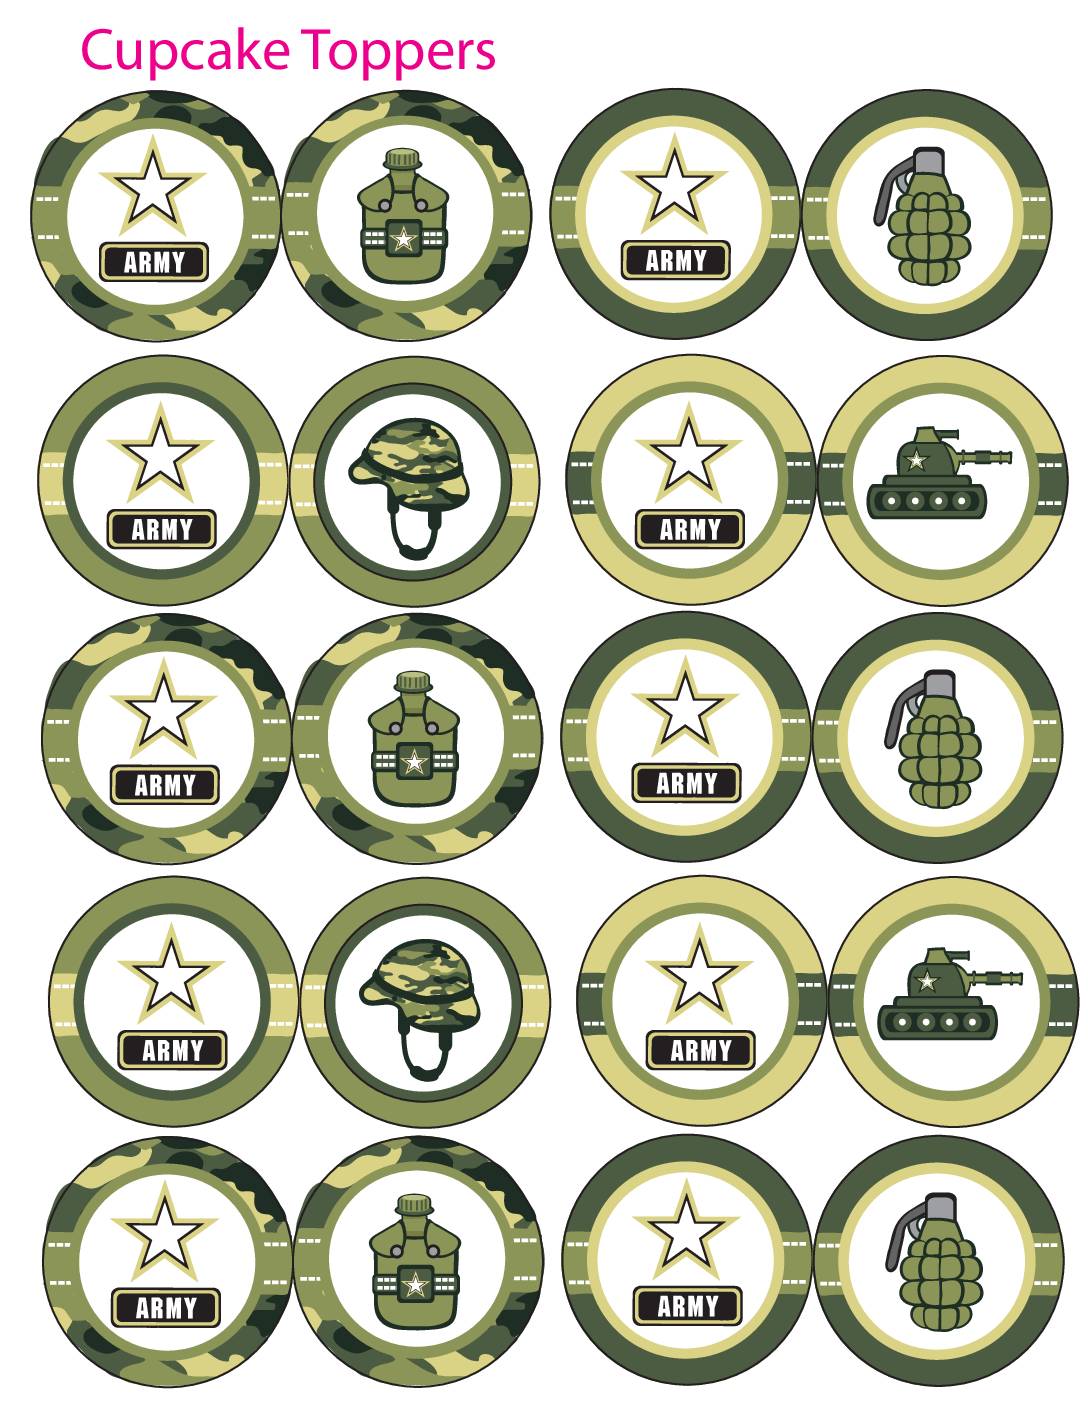 Cupcake Toppers army